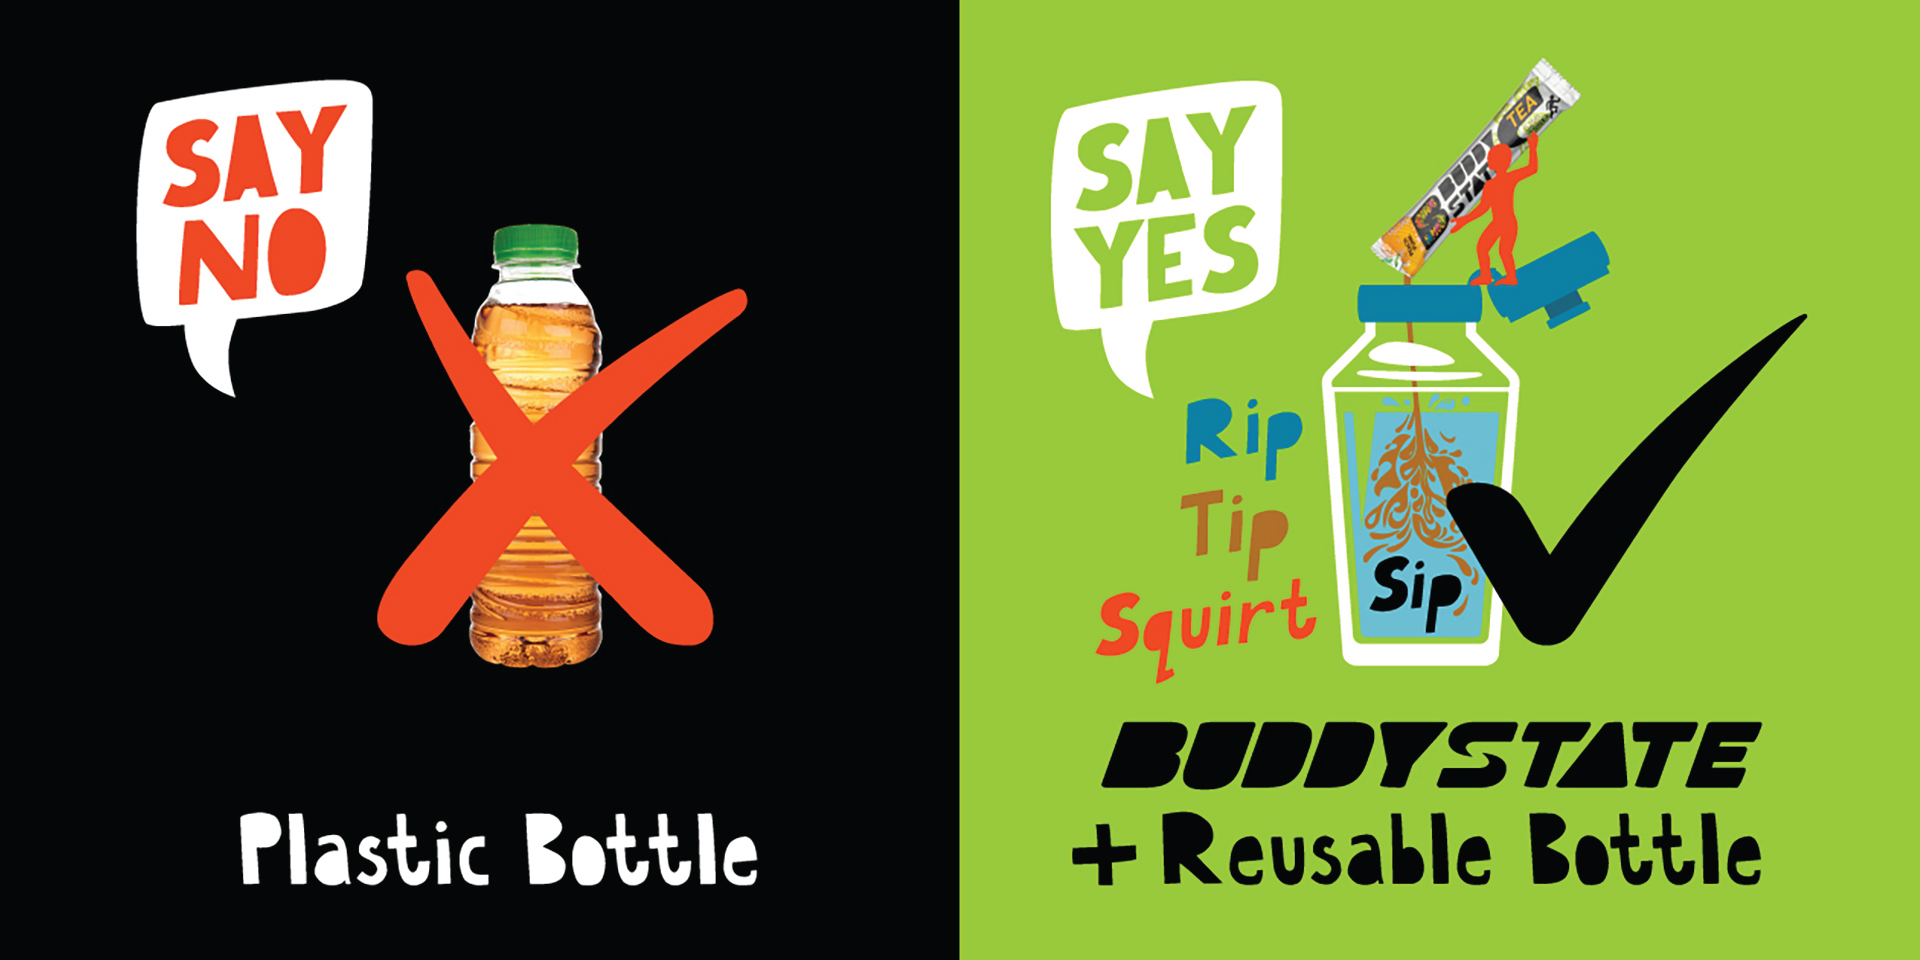 Buddy State Say no plastic bottle  Say yes rip tip squirt sip Buddy State + reusable plastic bottle